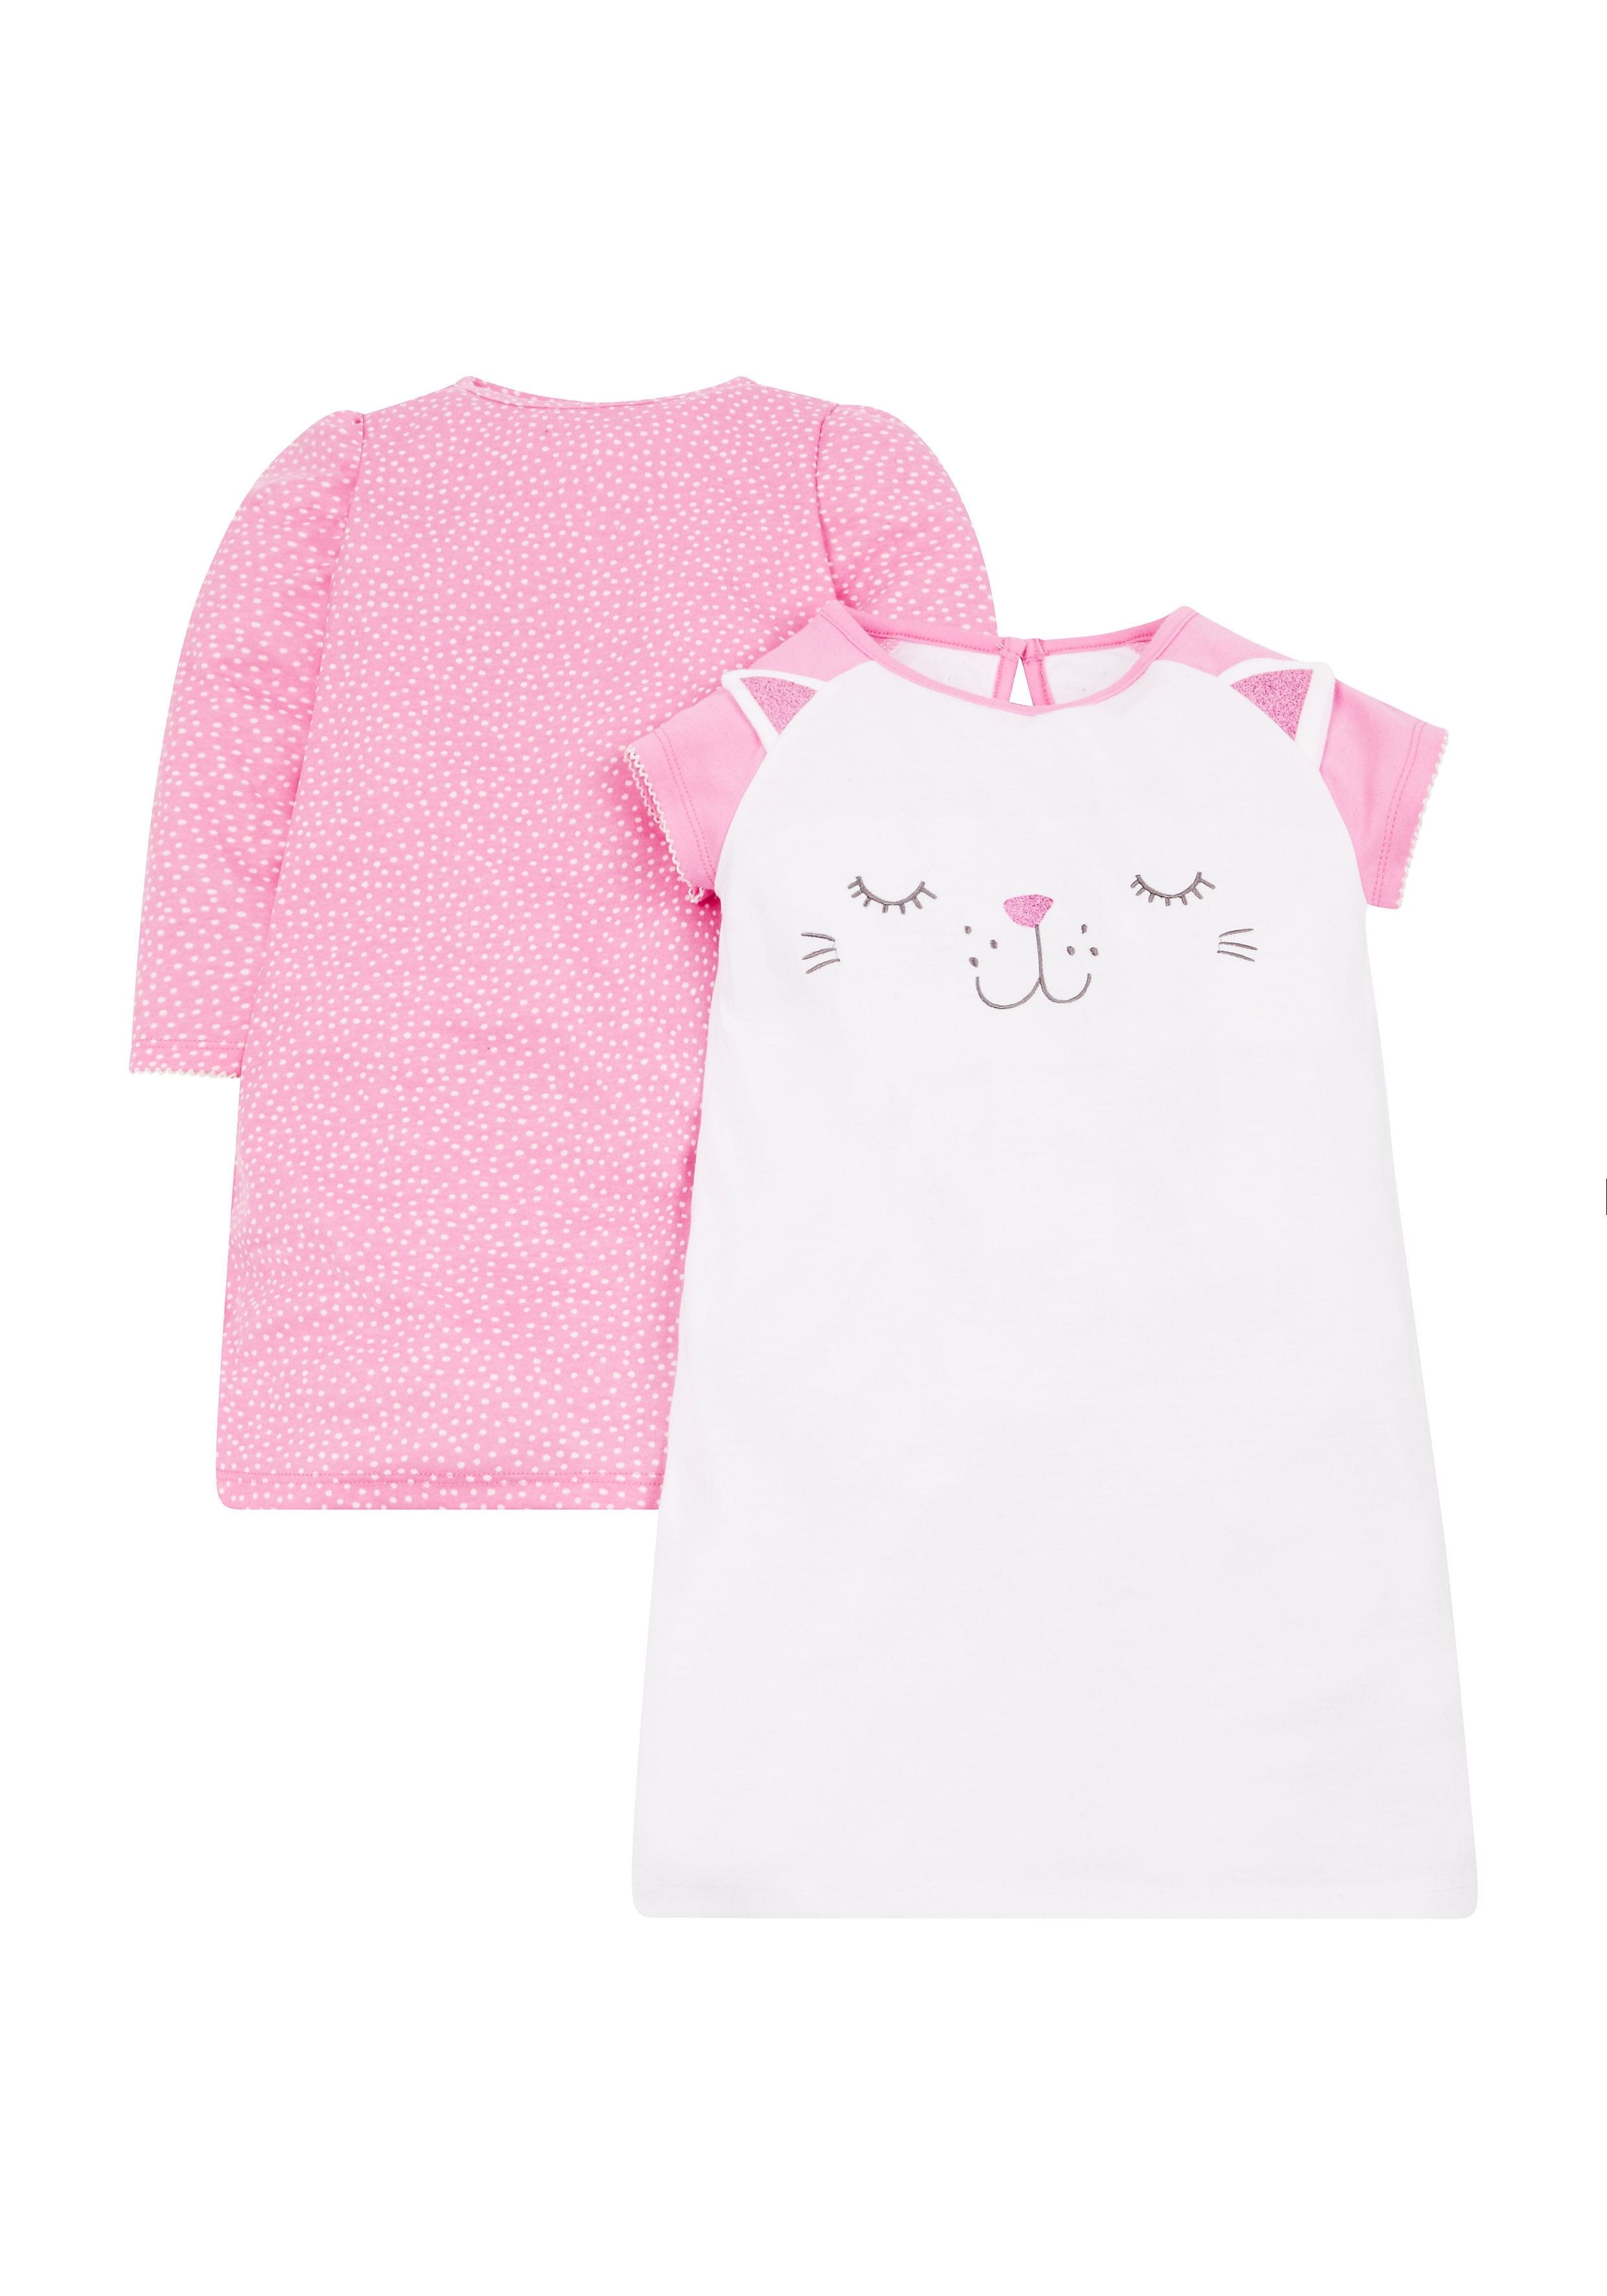 Mothercare | Pink and White Printed Sleepwear Dress - Pack of 2 0